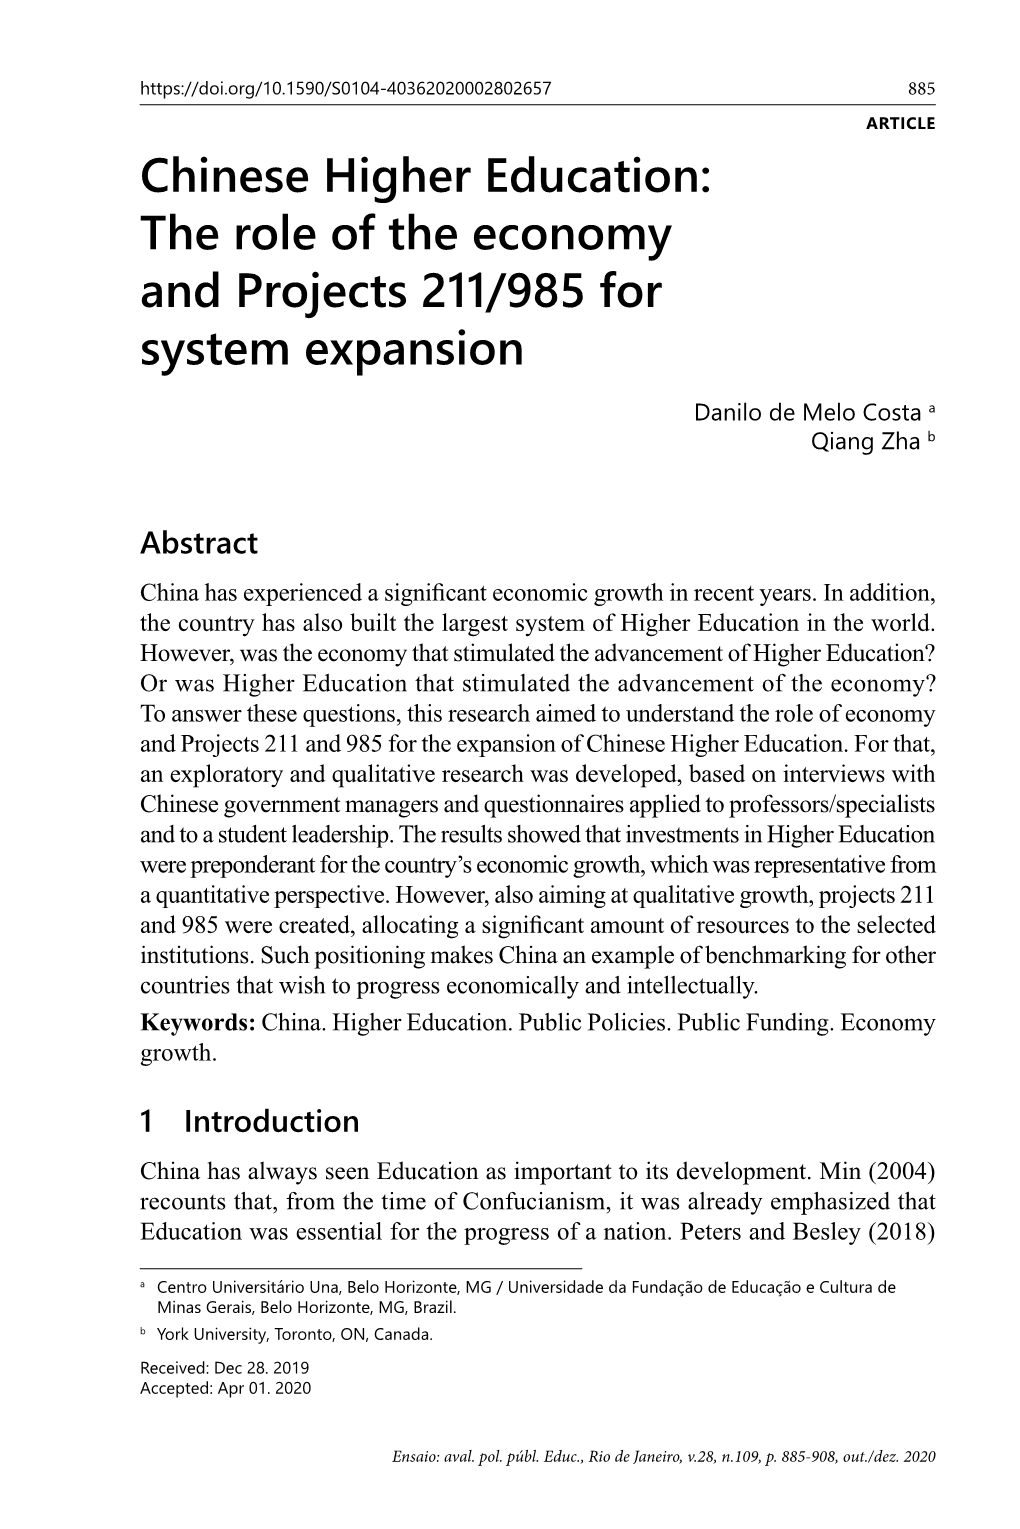 Chinese Higher Education: the Role of the Economy and Projects 211/985 for System Expansion Danilo De Melo Costa a Qiang Zha B